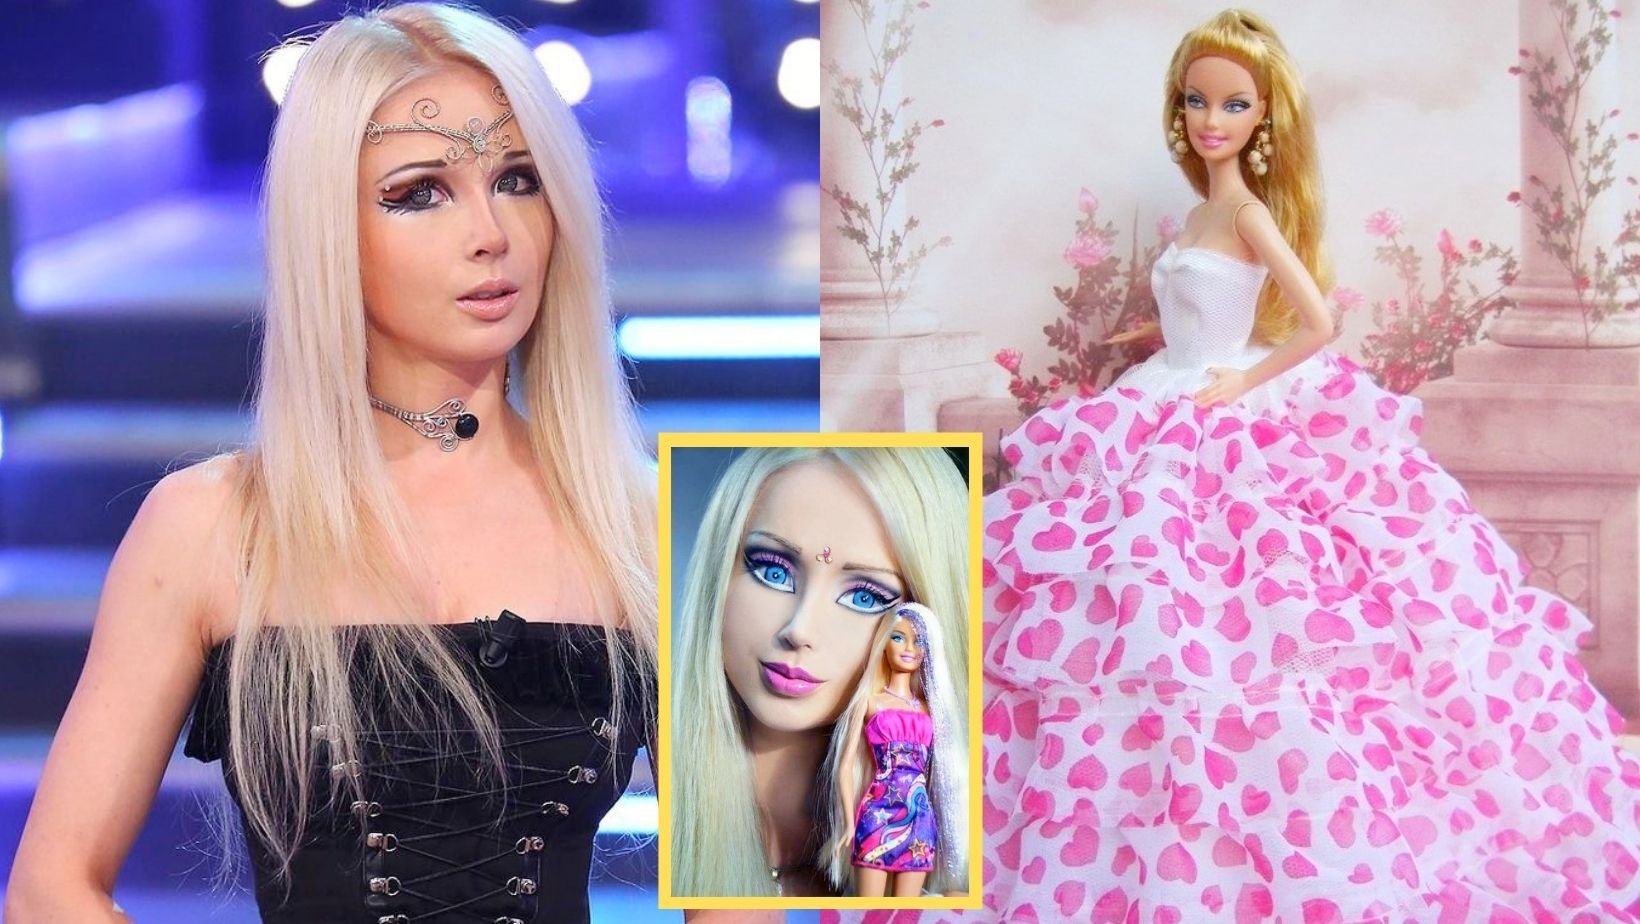 1 26.jpg?resize=412,232 - 'Human Barbie' Denies Having Plastic Surgery, Claims Her Doll-Like Appearance Is ALL NATURAL